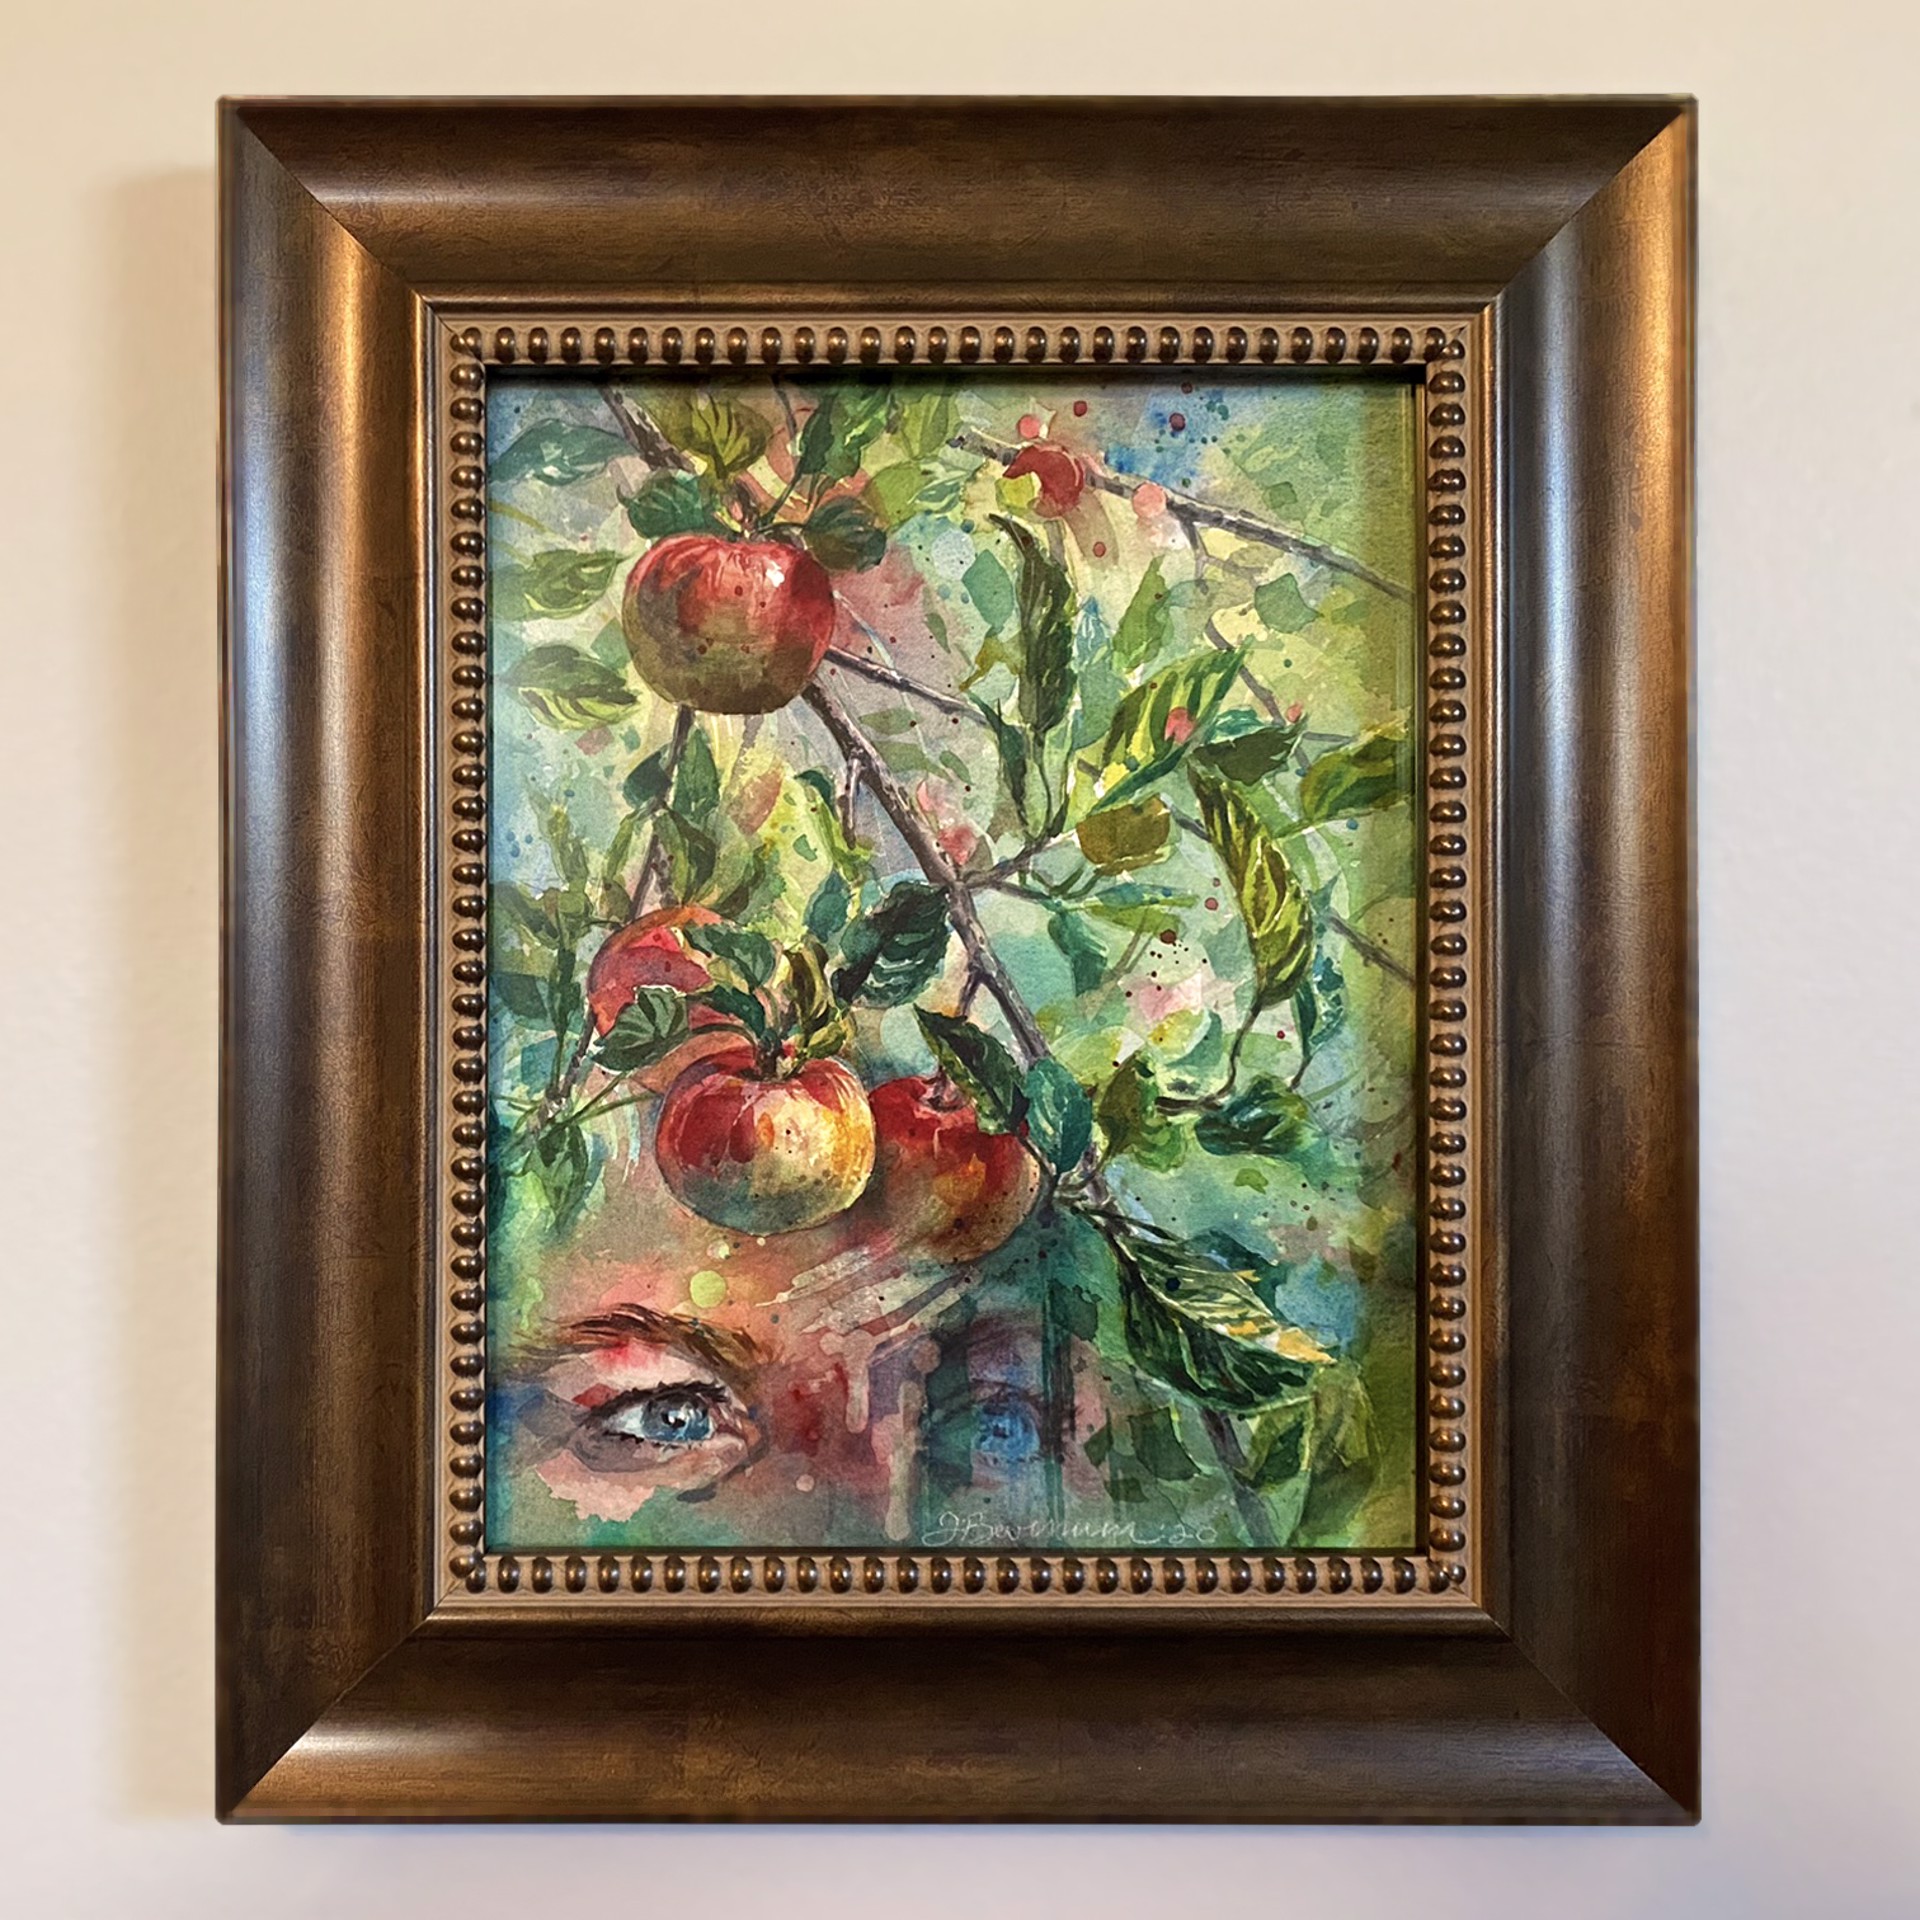 A watercolor painting by Joanna Barnum depicting apples on a tree in the foreground and in the background you see a portion persons head with blue eyes.